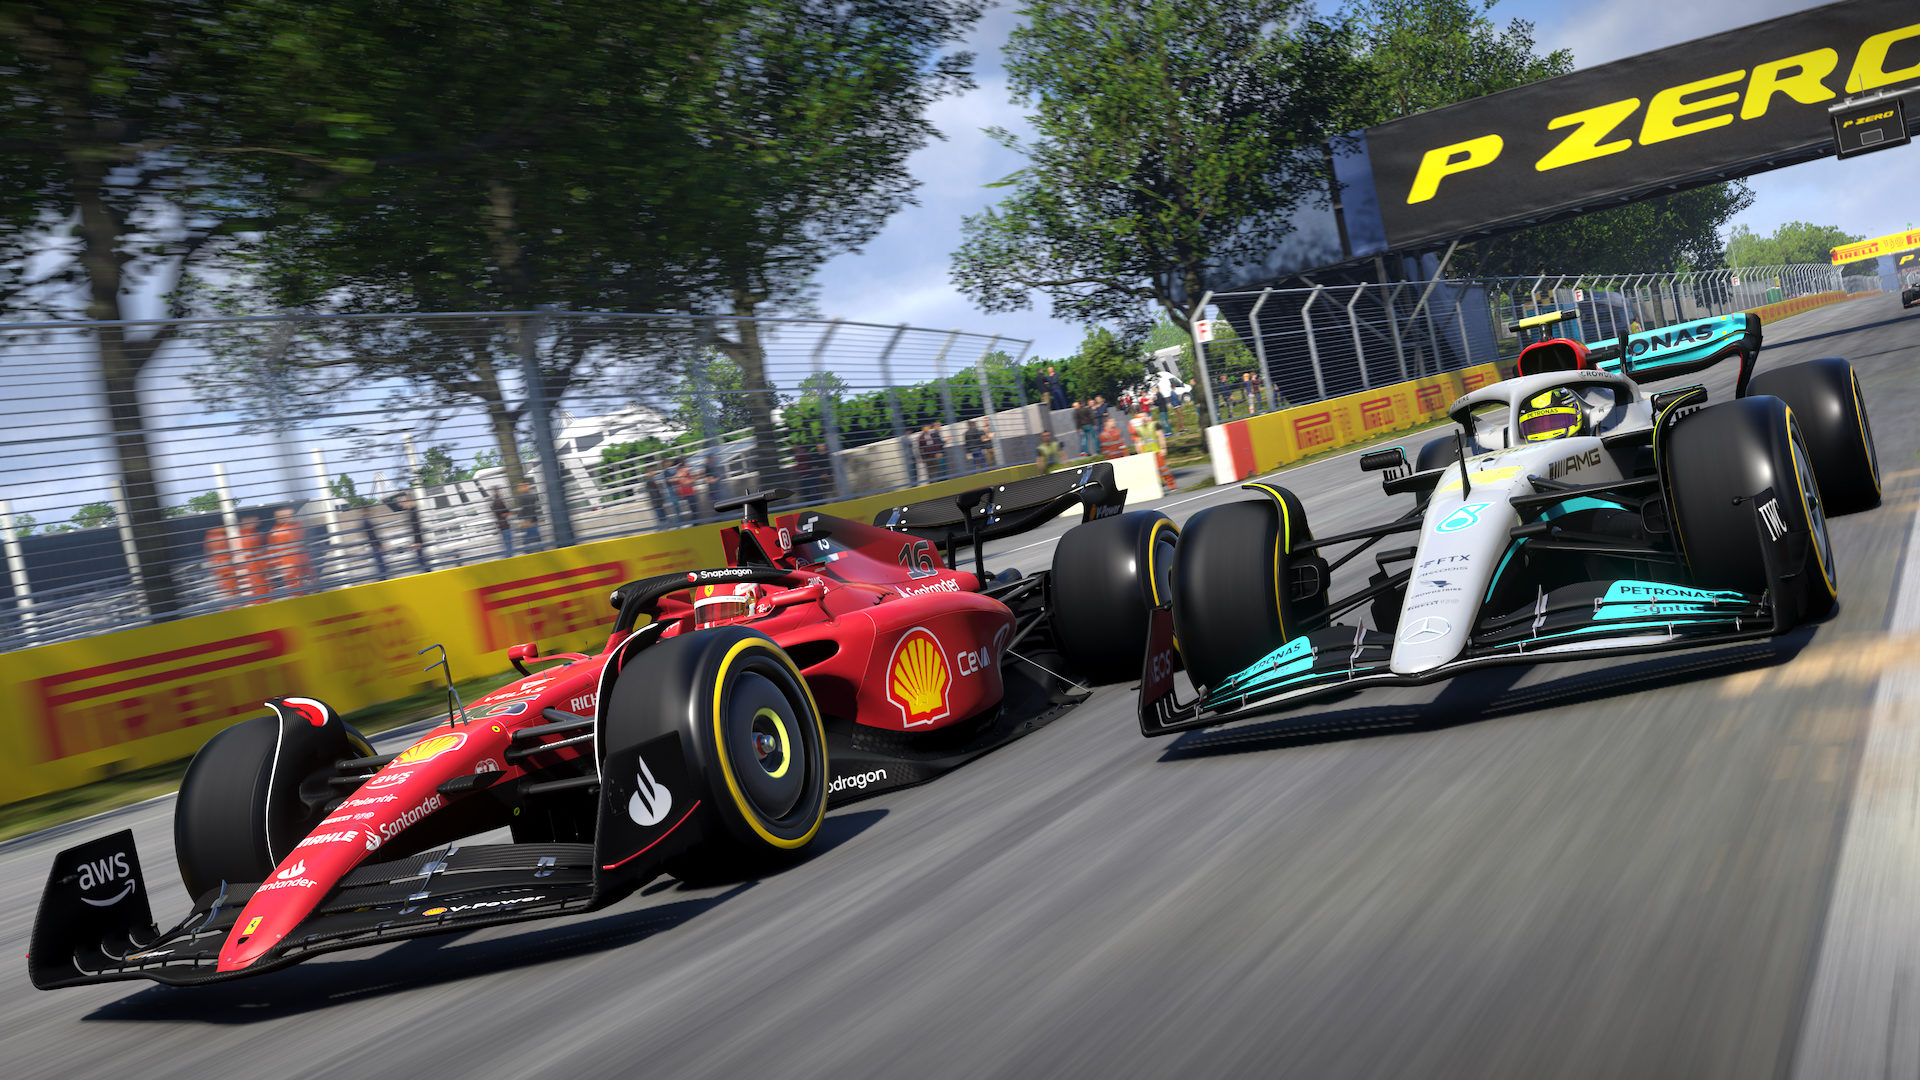 F1 22 VR Gameplay Video - Canadian Grand Prix and PC Gameplay